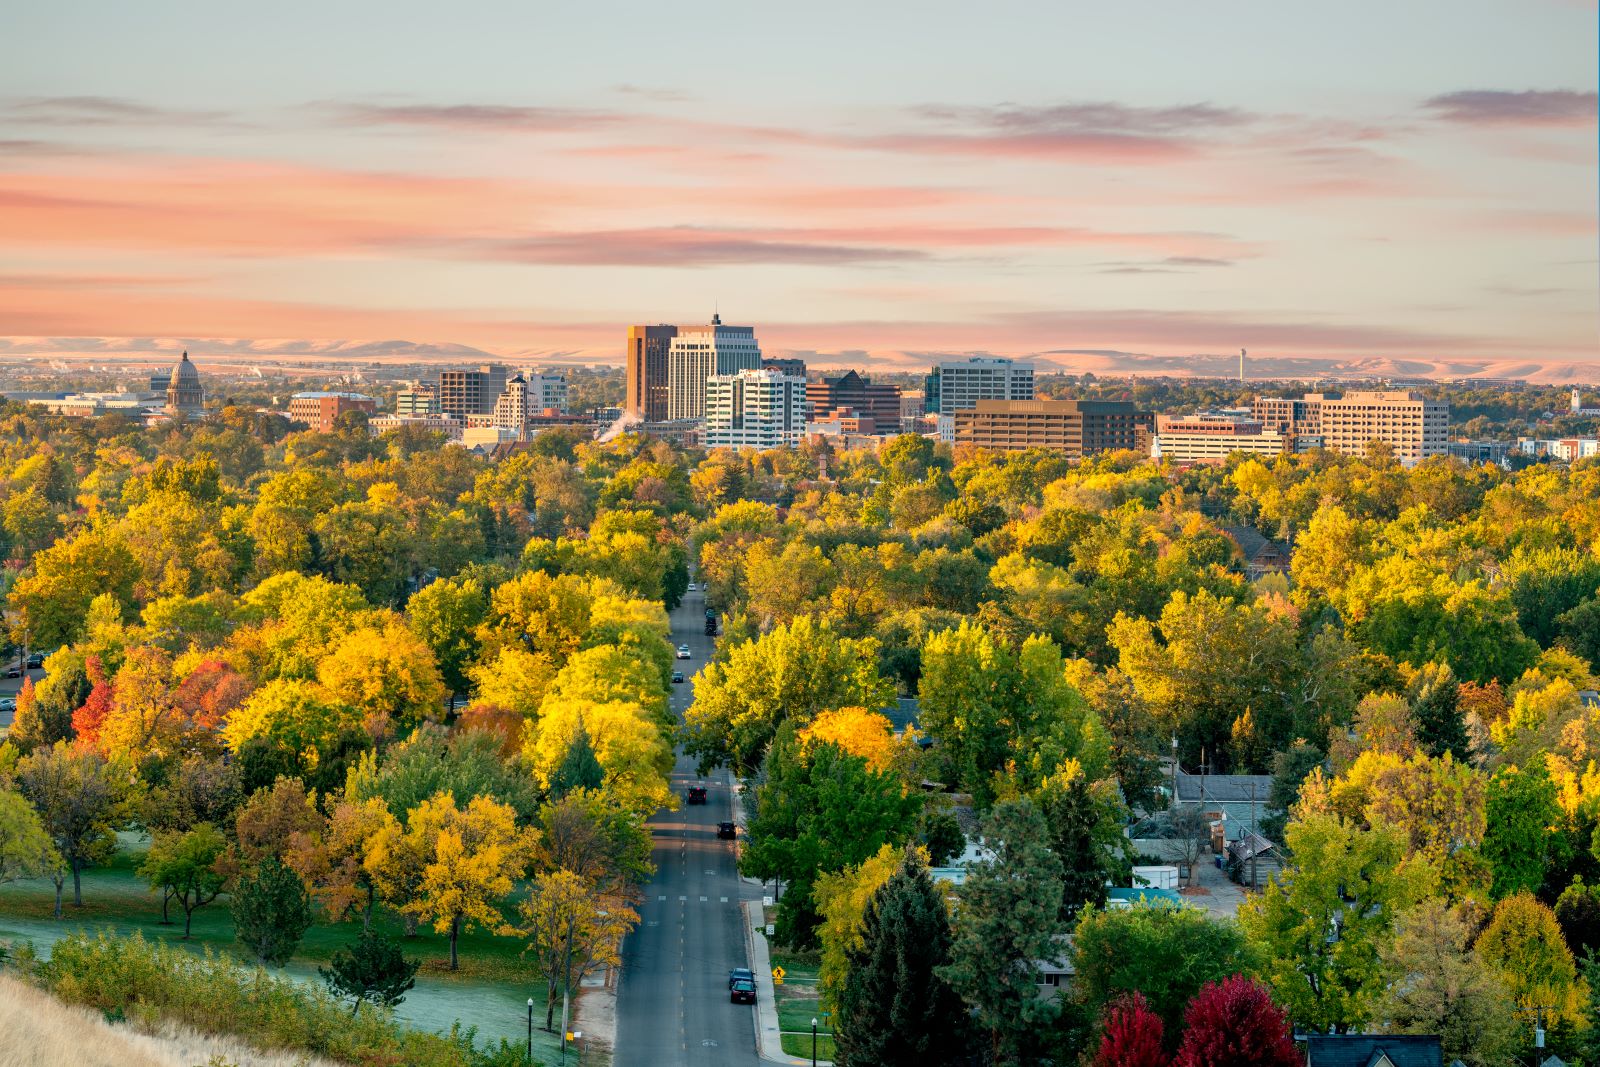 Image credit: Shutterstock / Charles Knowles <p>Boise offers a mix of outdoor activities and urban amenities at a low cost. Spend about $60 a day to explore the city and its surroundings.</p>